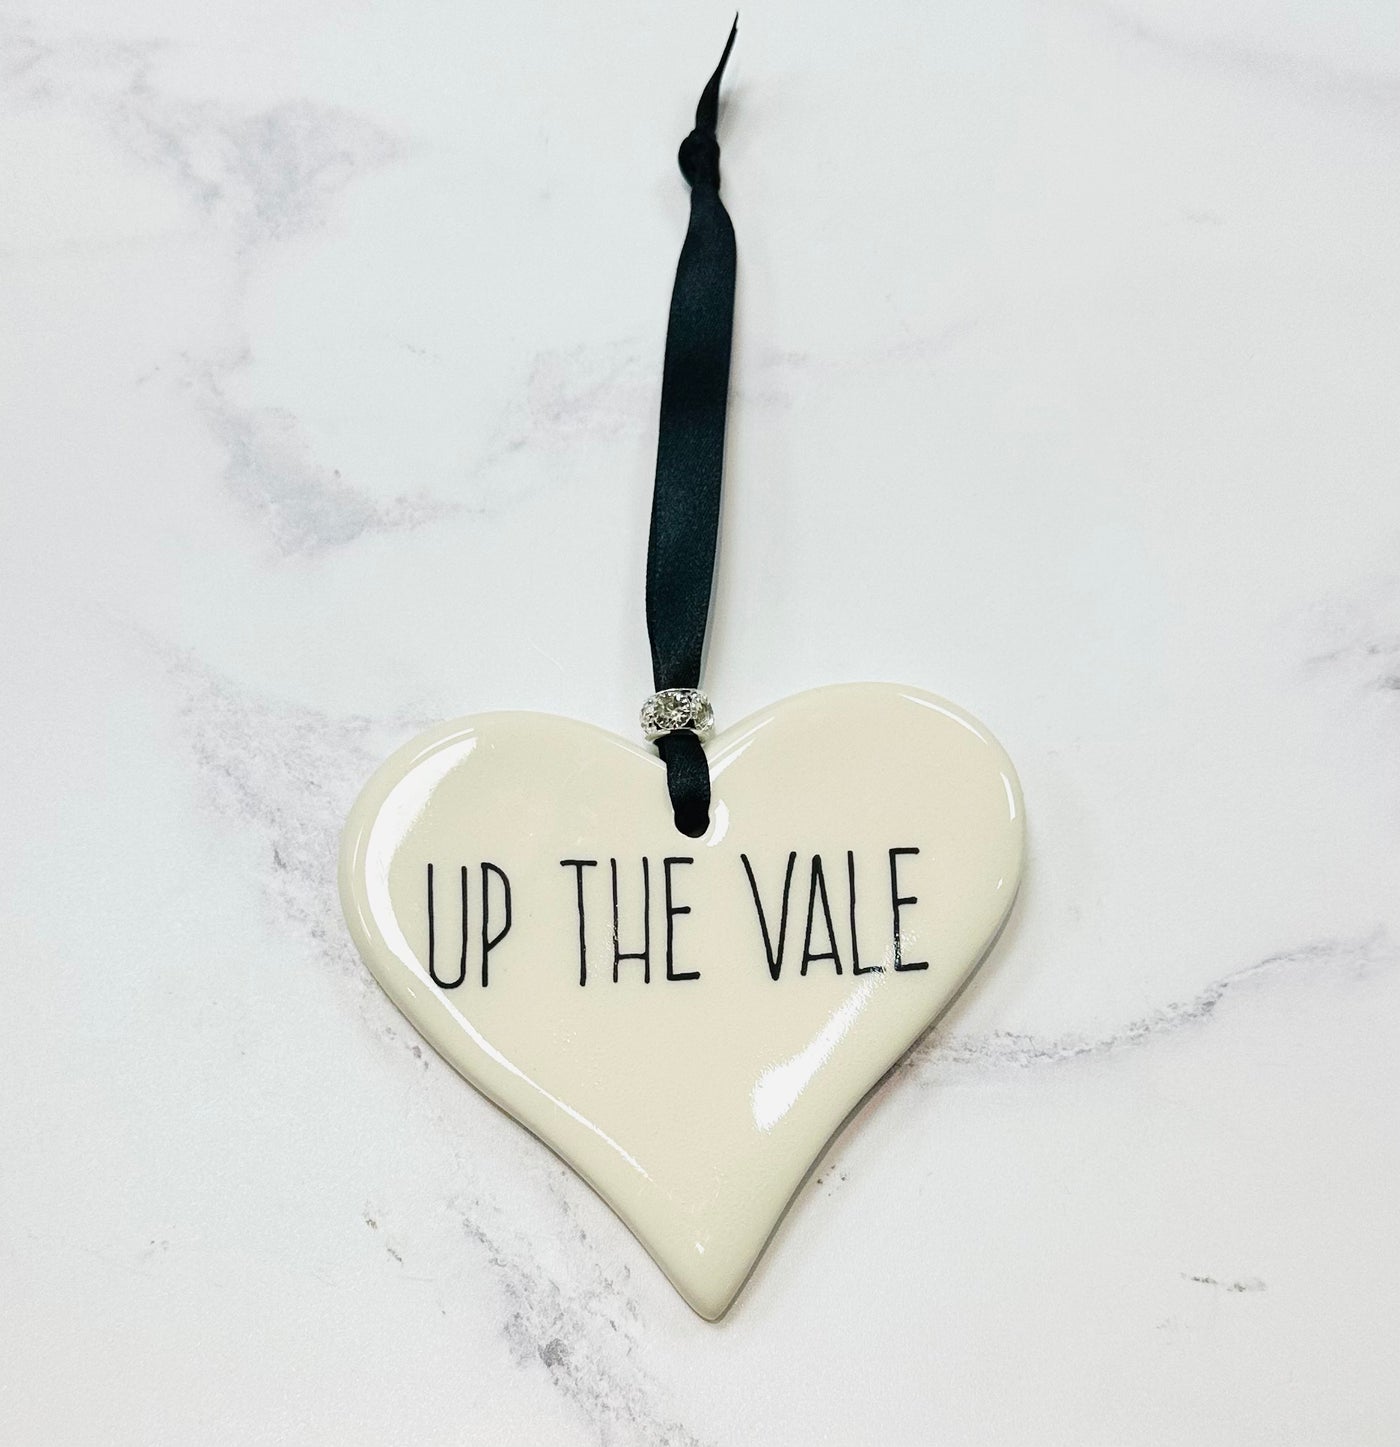 Dimbleby Ceramics LARGE Sentiment Hanging Heart - Up The Vale